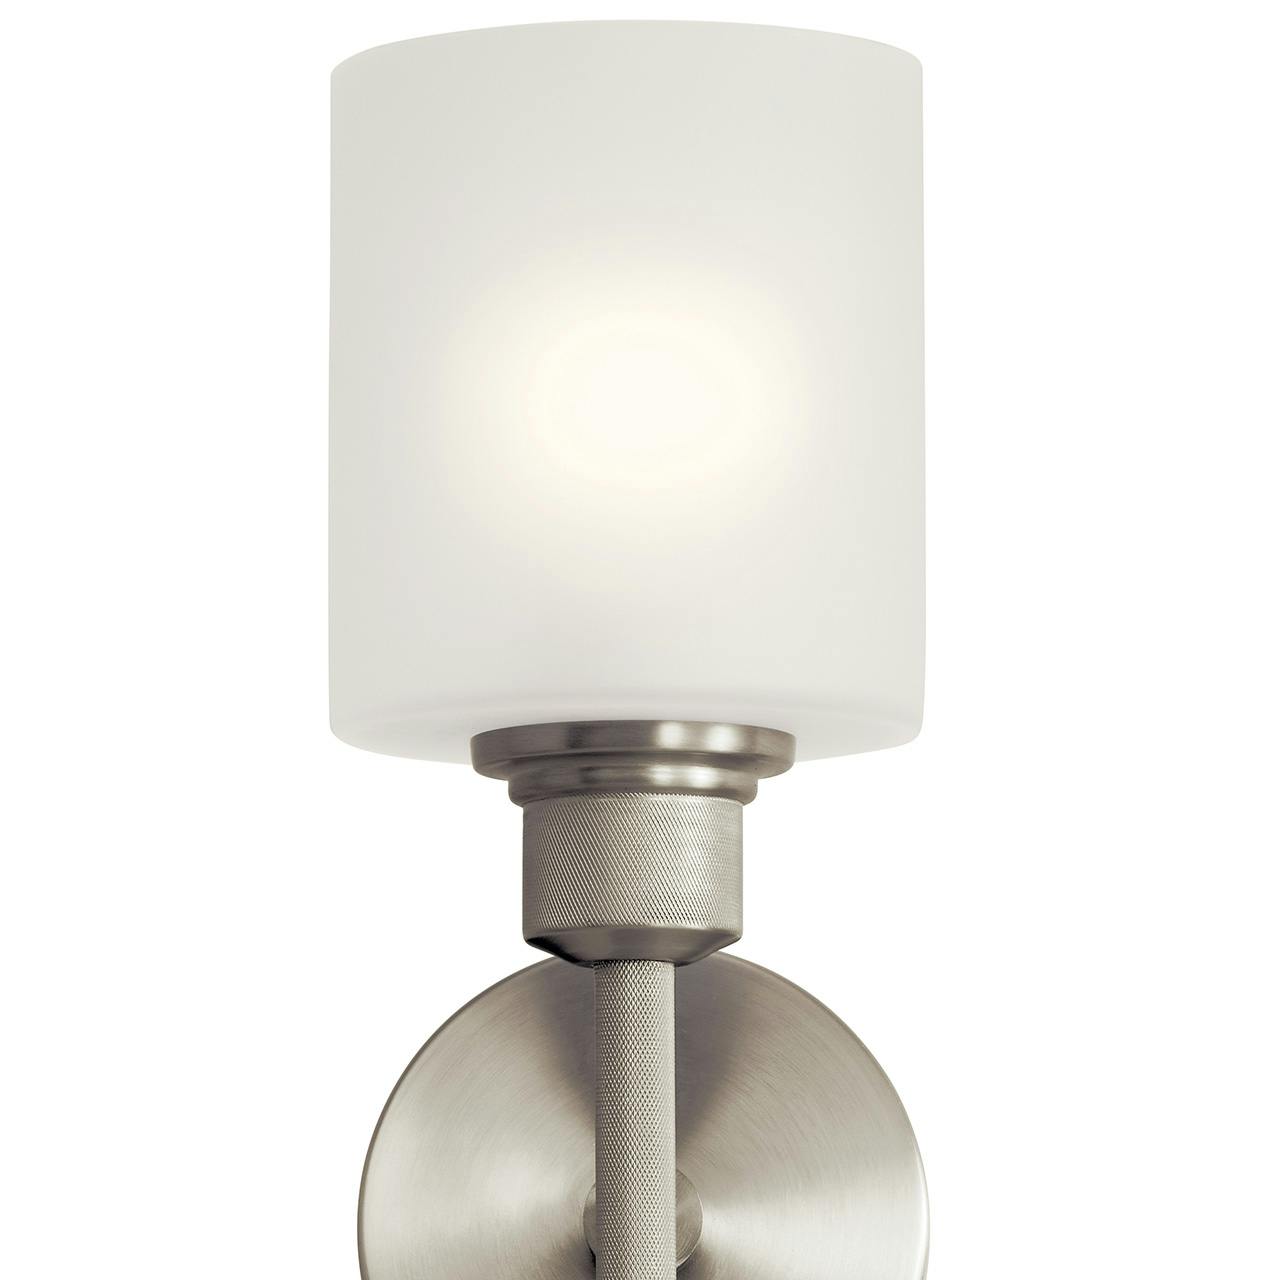 Close up view of the Lynn Haven 1 Light Sconce Brushed Nickel on a white background